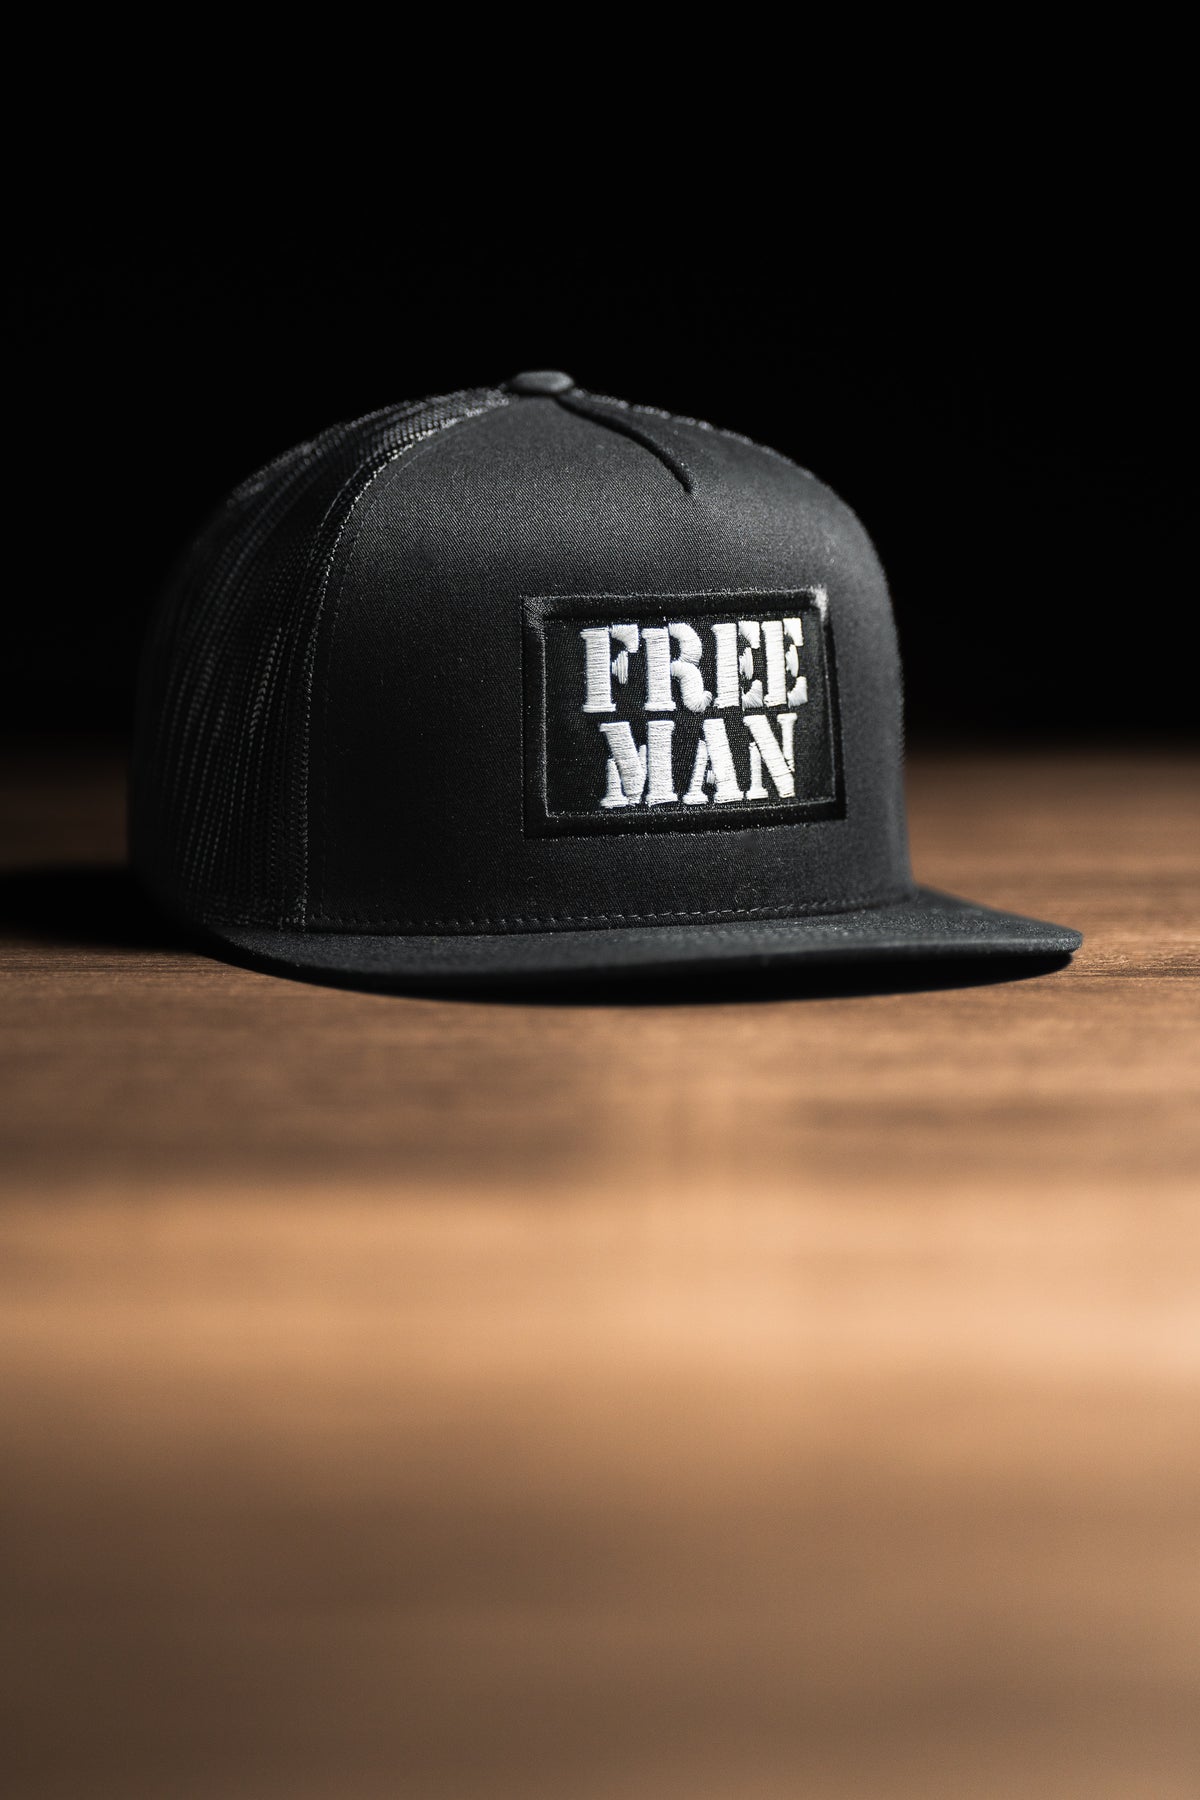 Lions Not Sheep FREE MAN Hat (All Black) - Lions Not Sheep ®